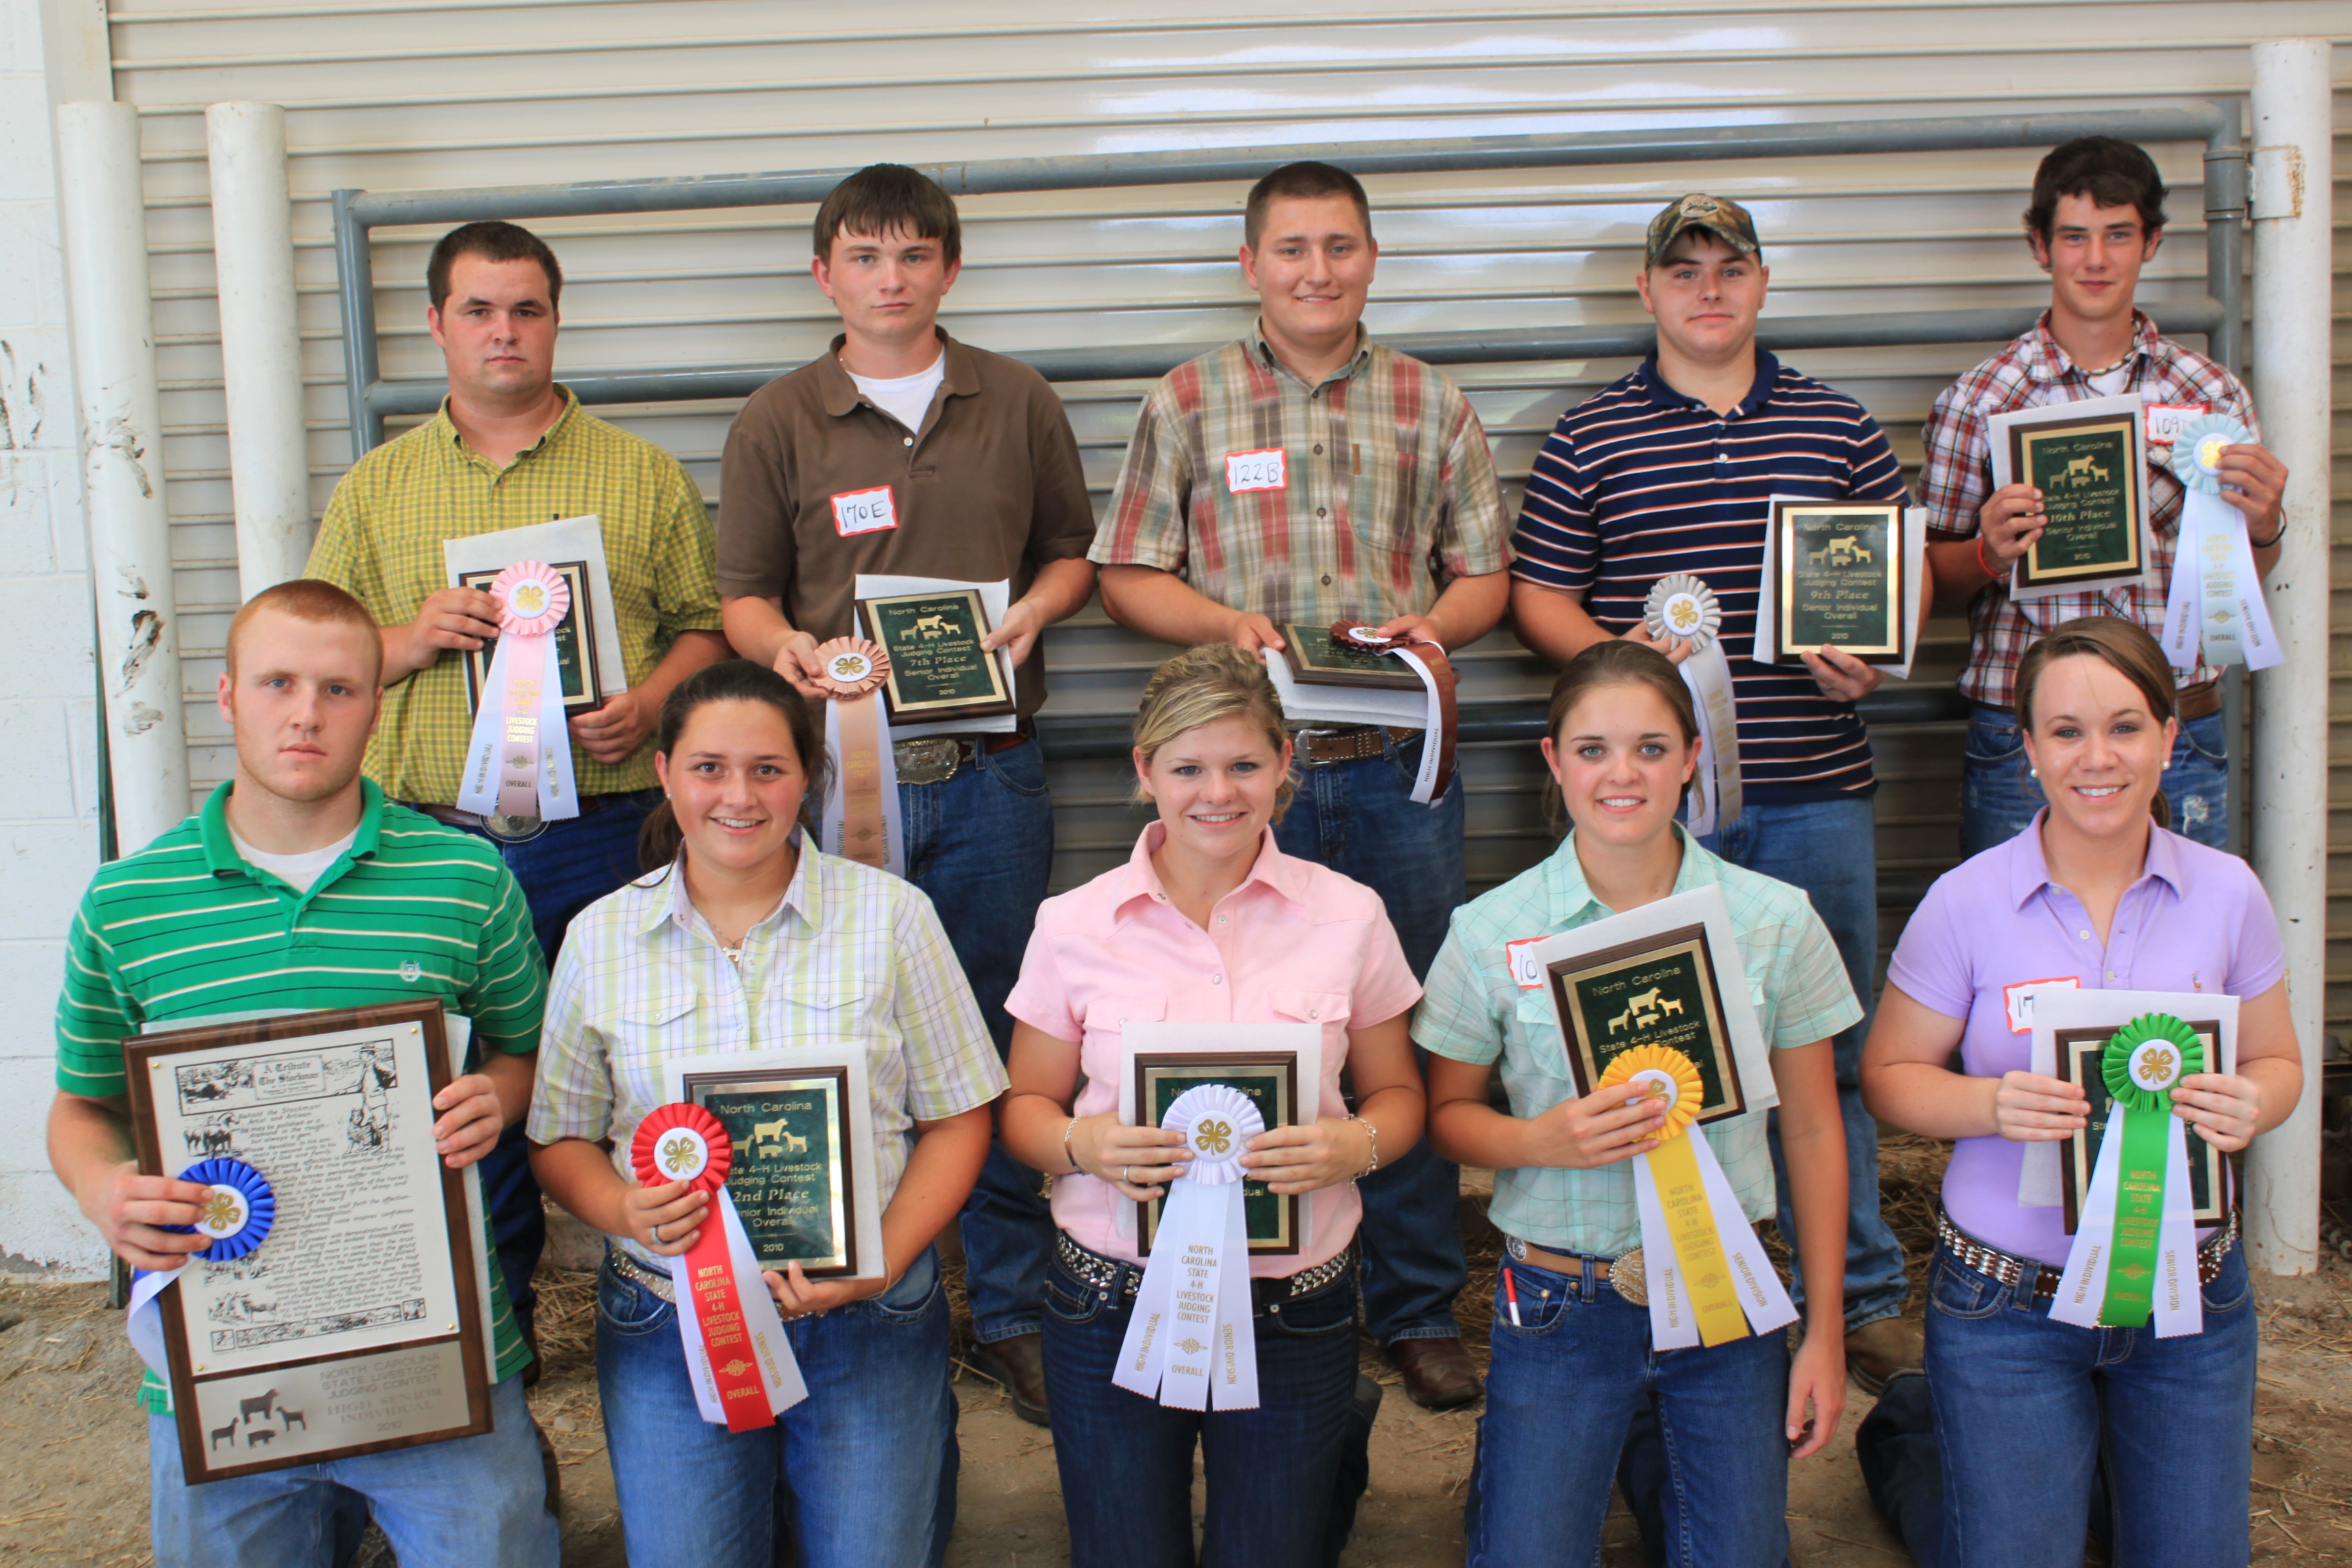 2010 Livestock Contest winners posing with their awards. 